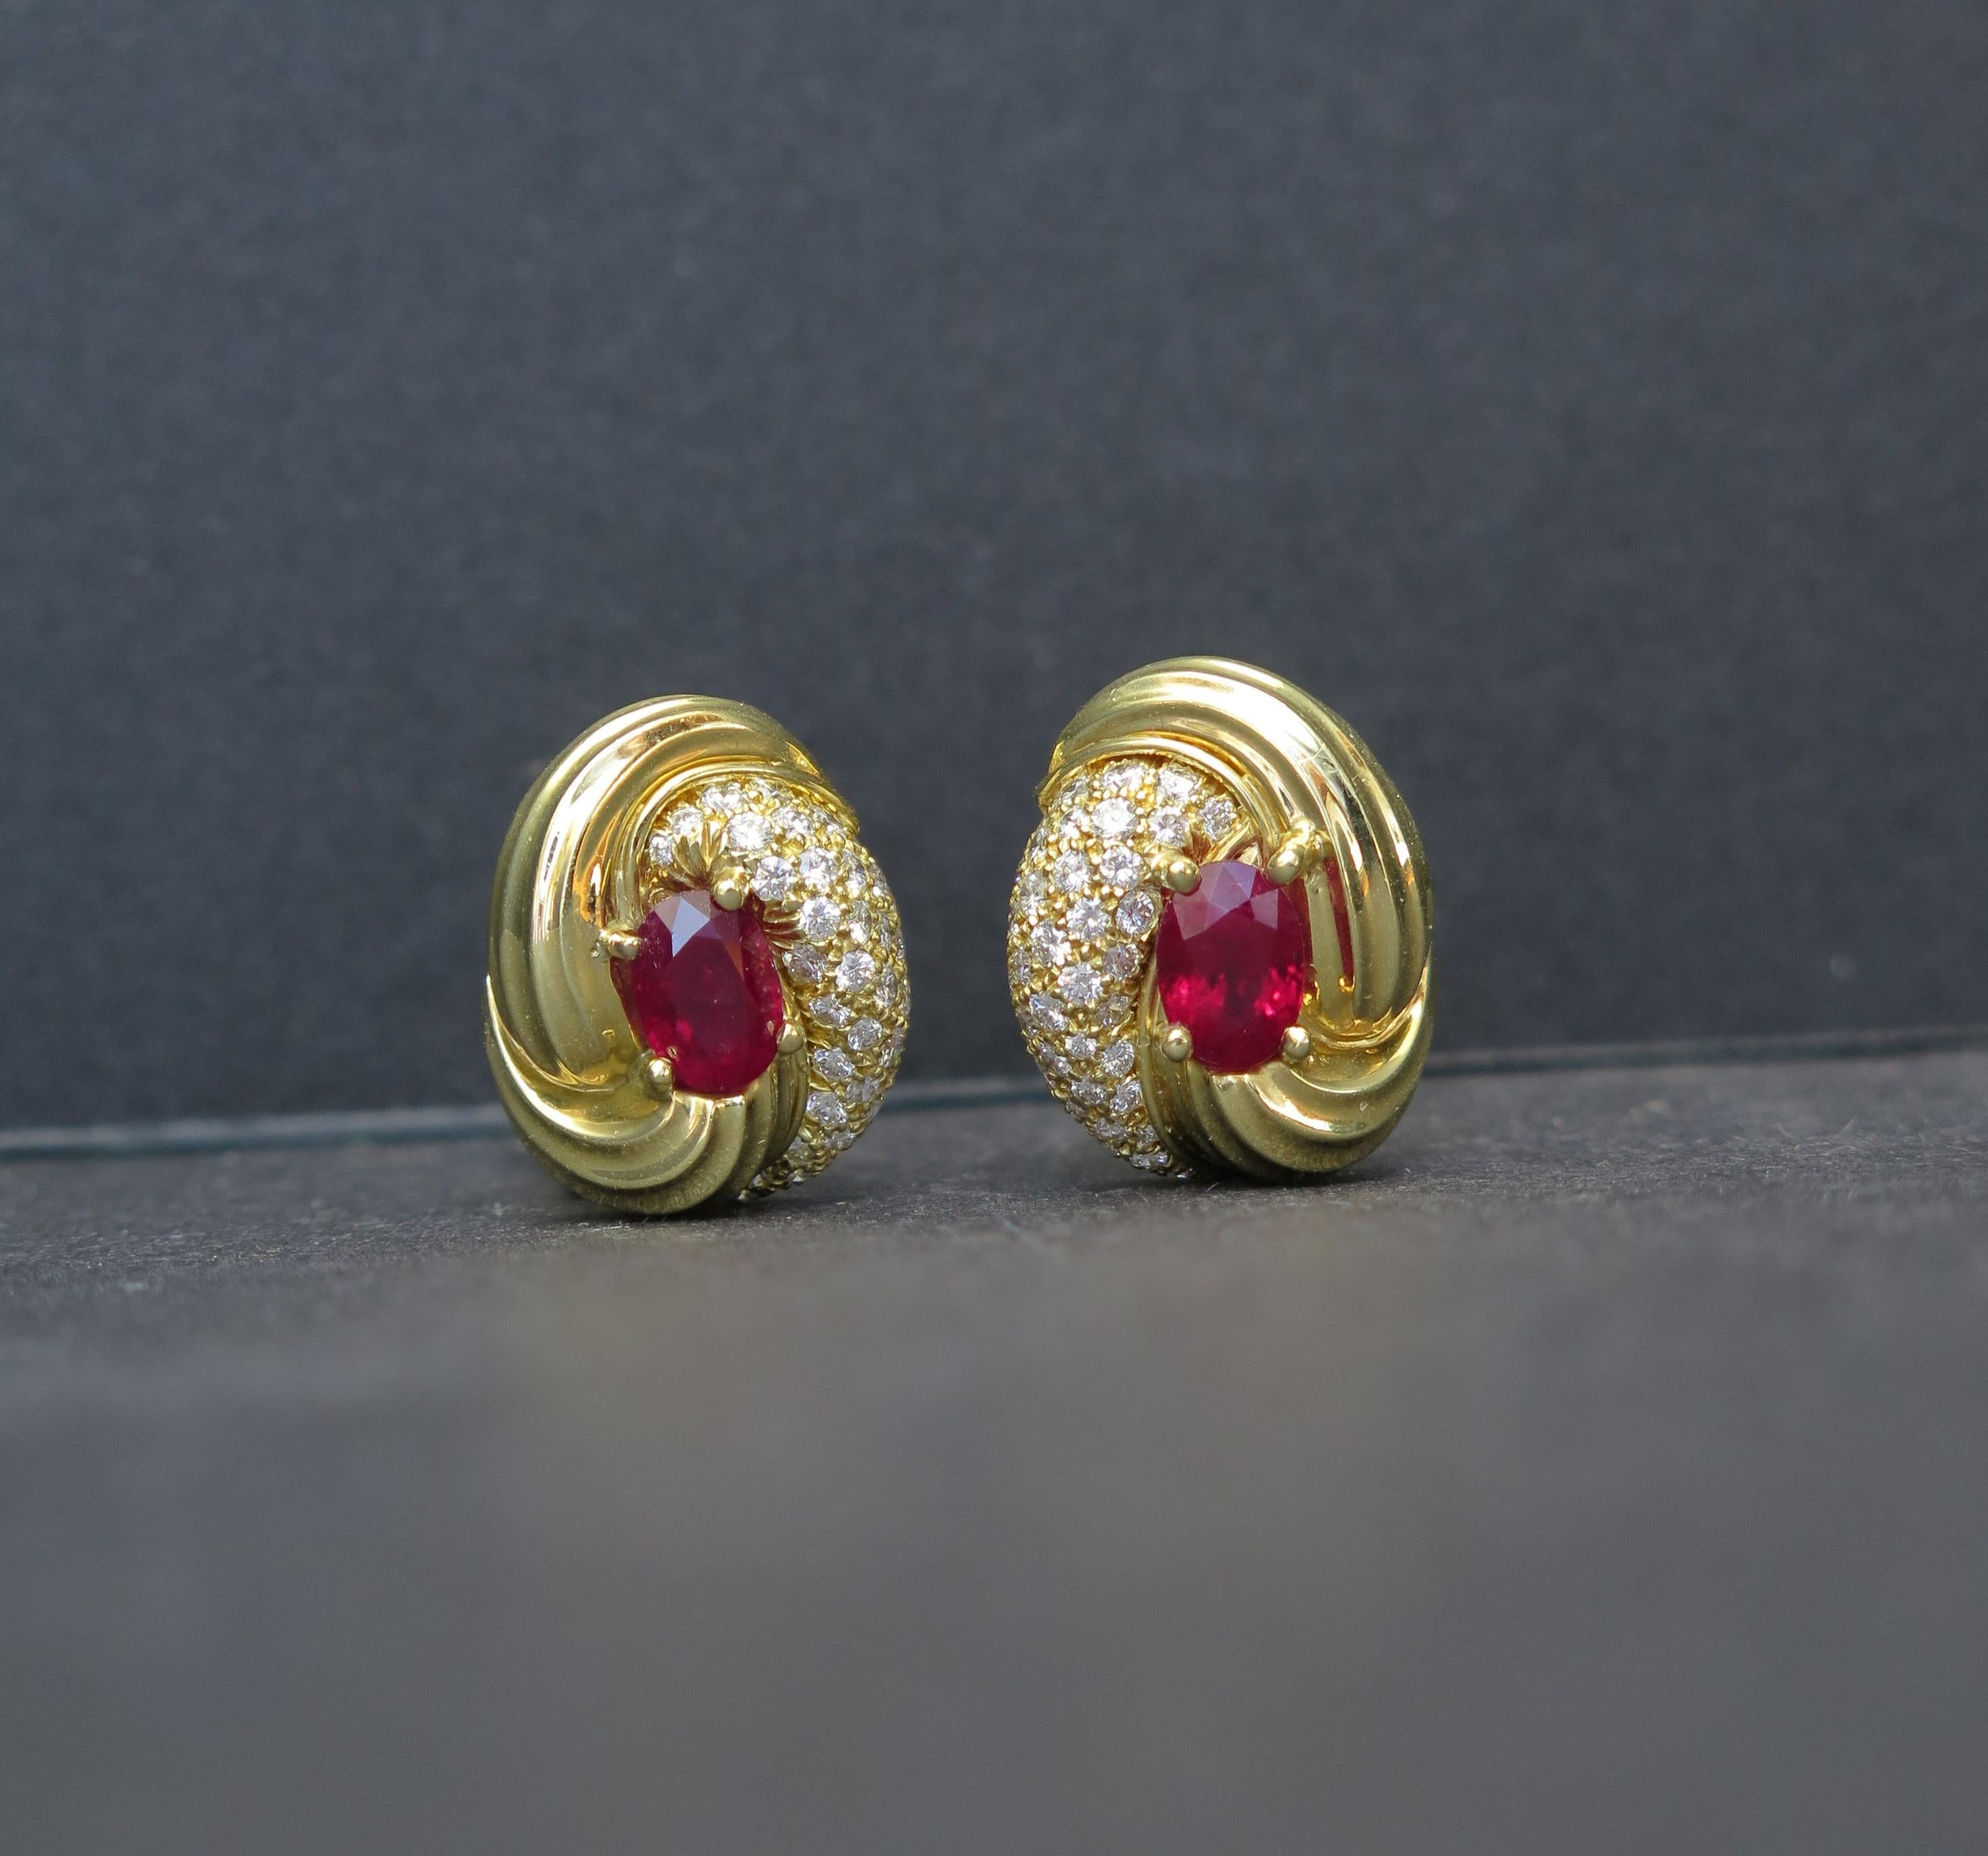 Modern Henry Dunay Ruby and Diamond 18 Karat Gold Knot Earrings, 1980s For Sale